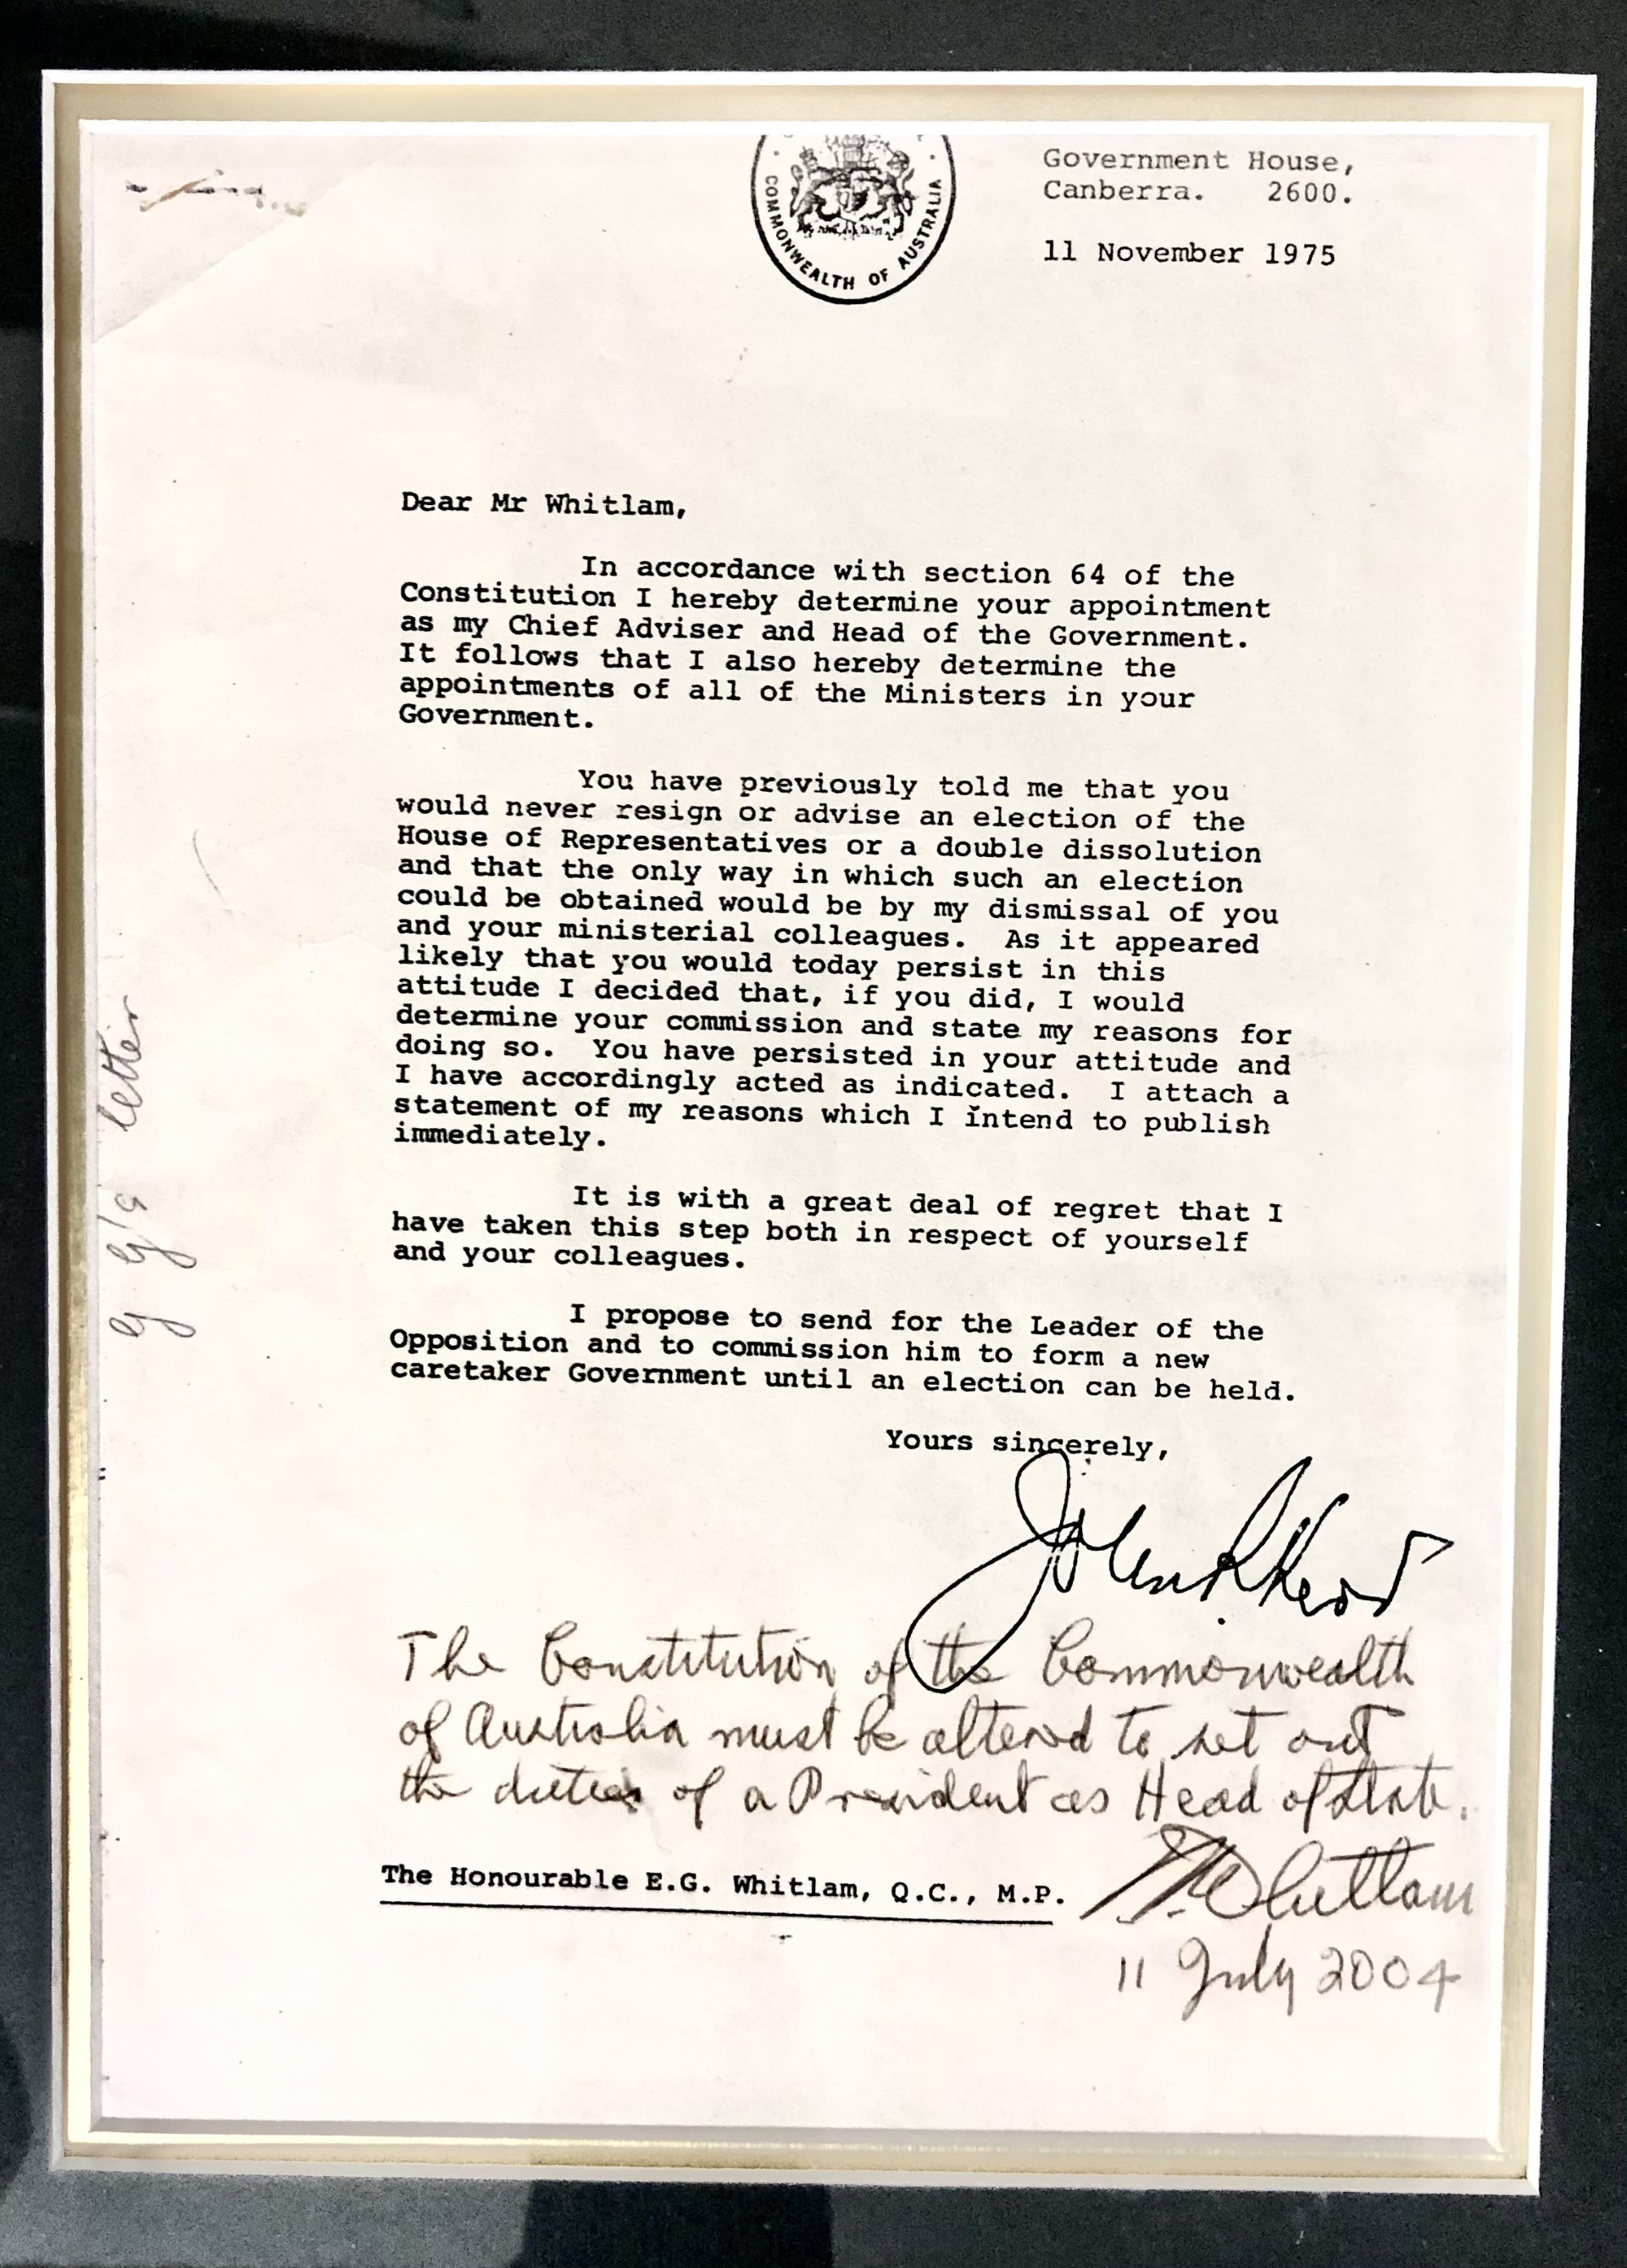 A photo of Sir John Kerr's dismissal letter addressed to Gough Whitlam in a glass cabinet. Whitlam has graffitied over the top.